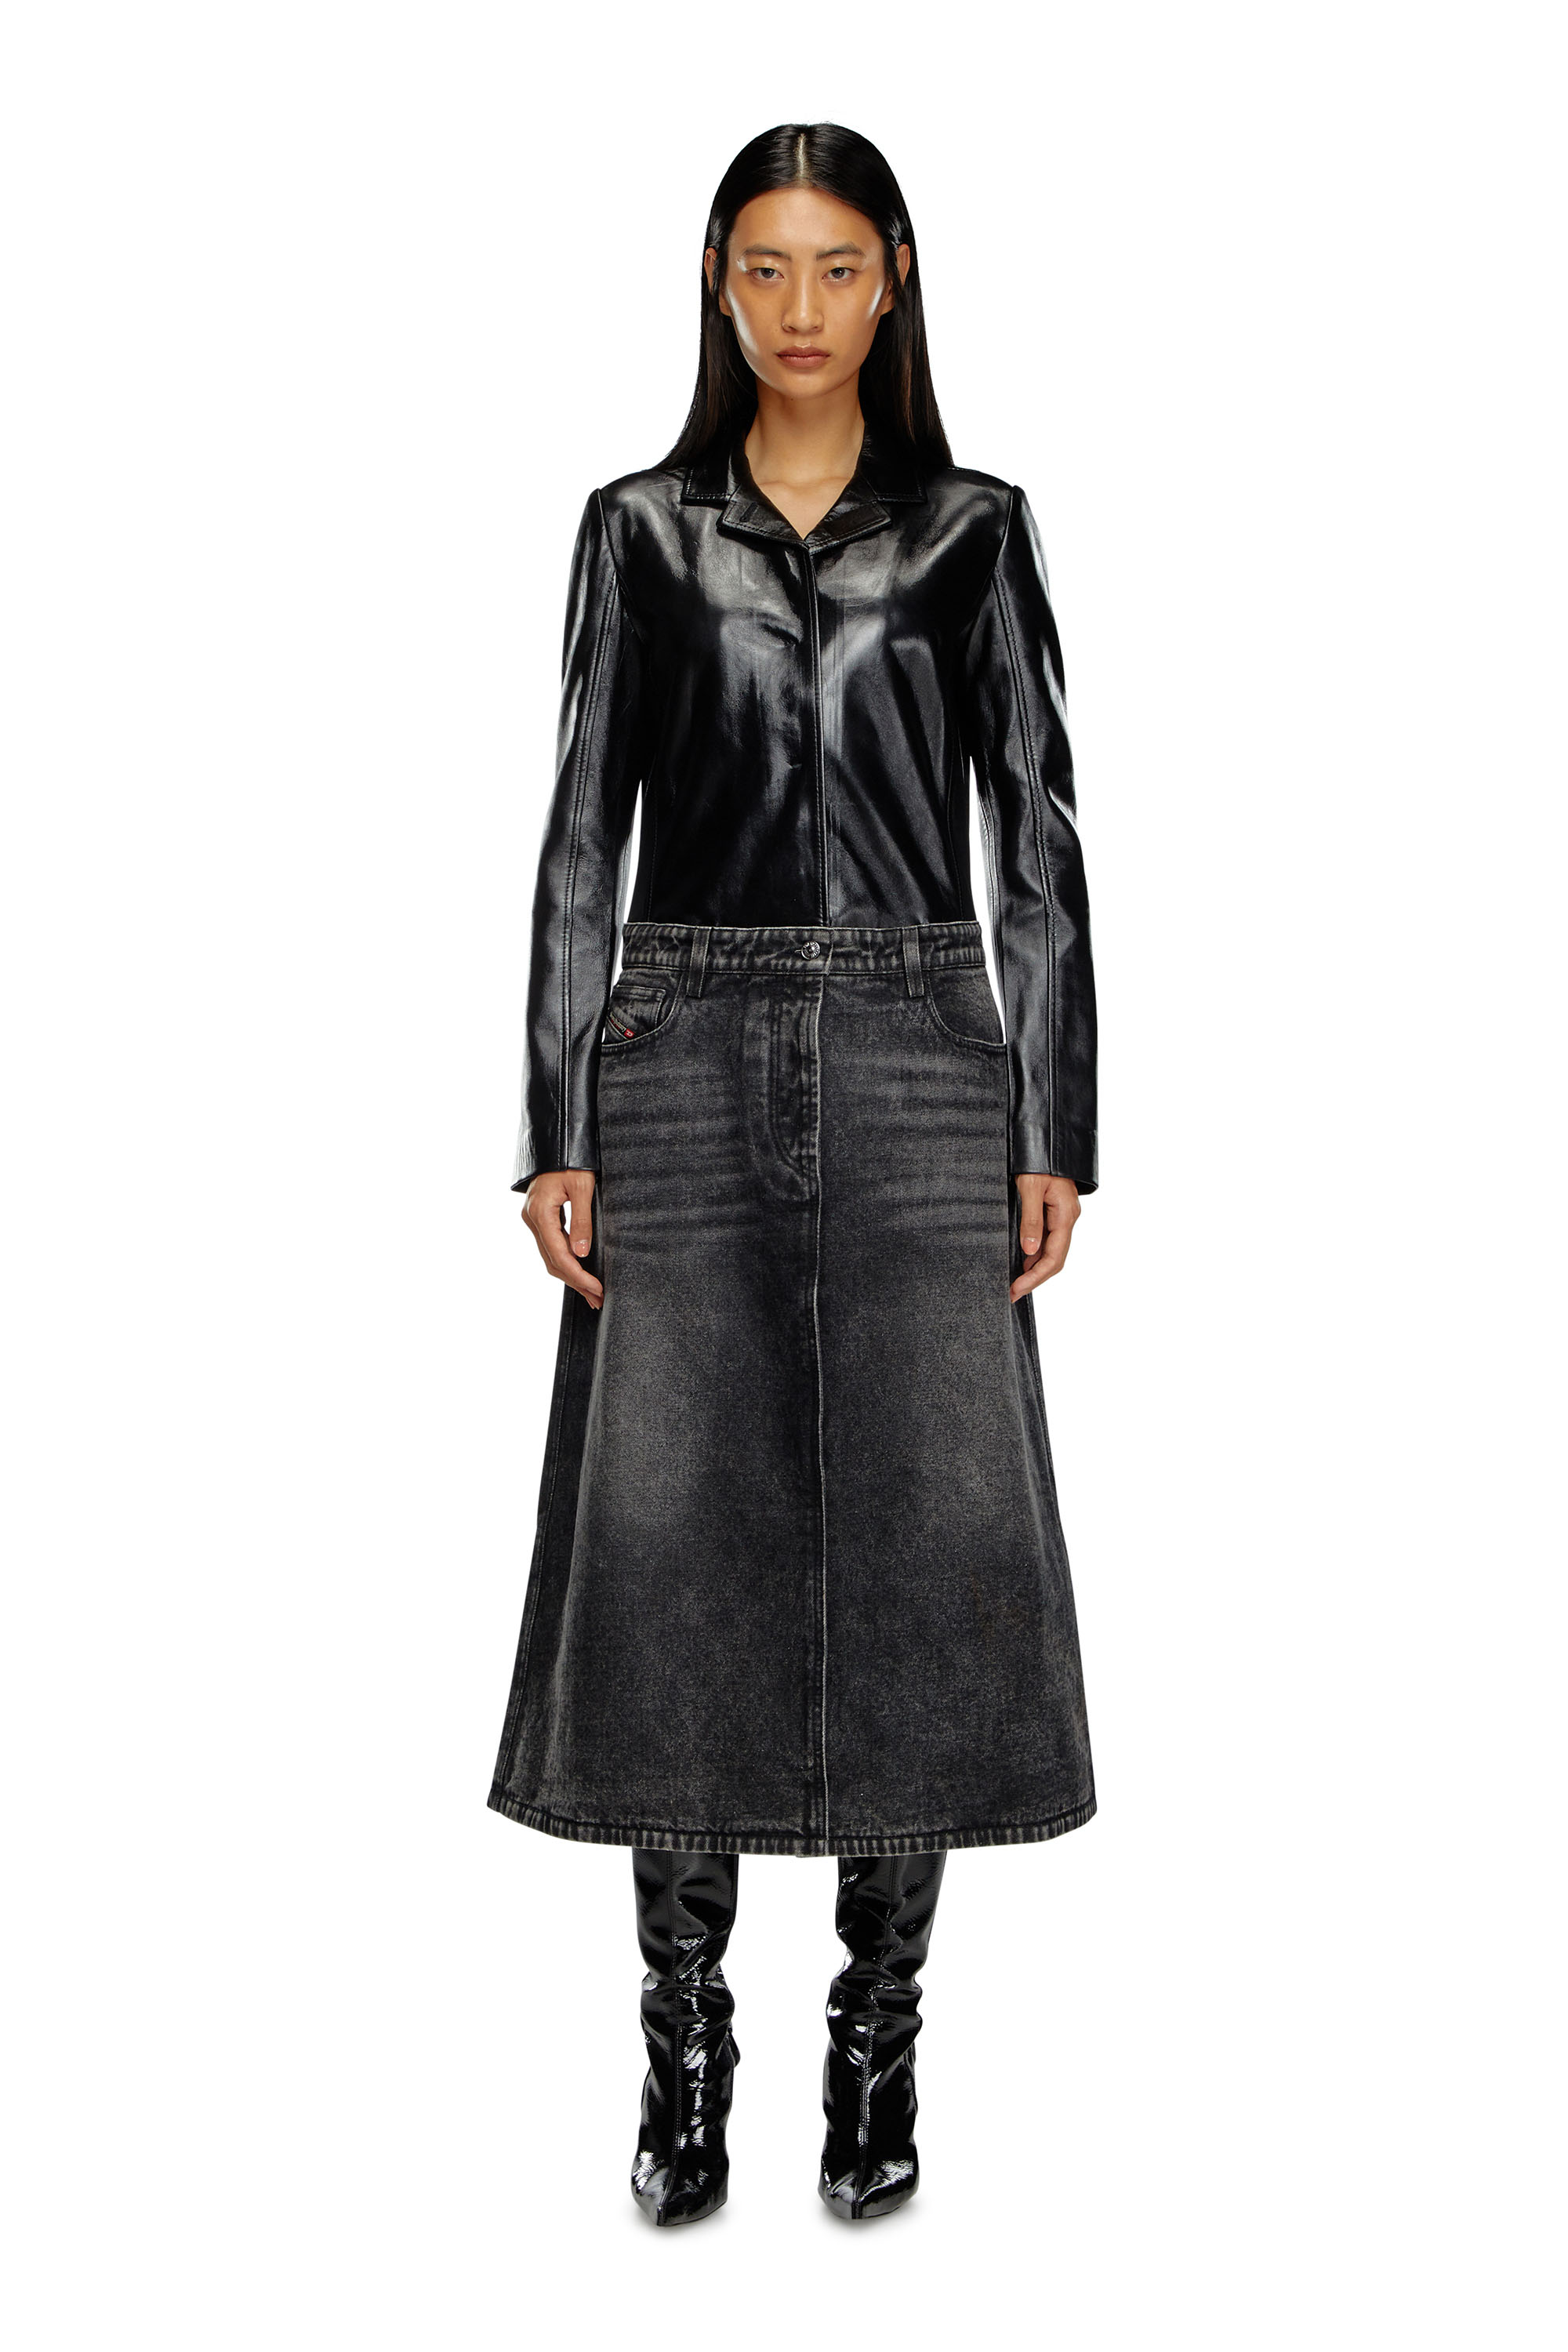 Diesel - L-ORY, Woman Hybrid coat in denim and leather in Black - Image 2